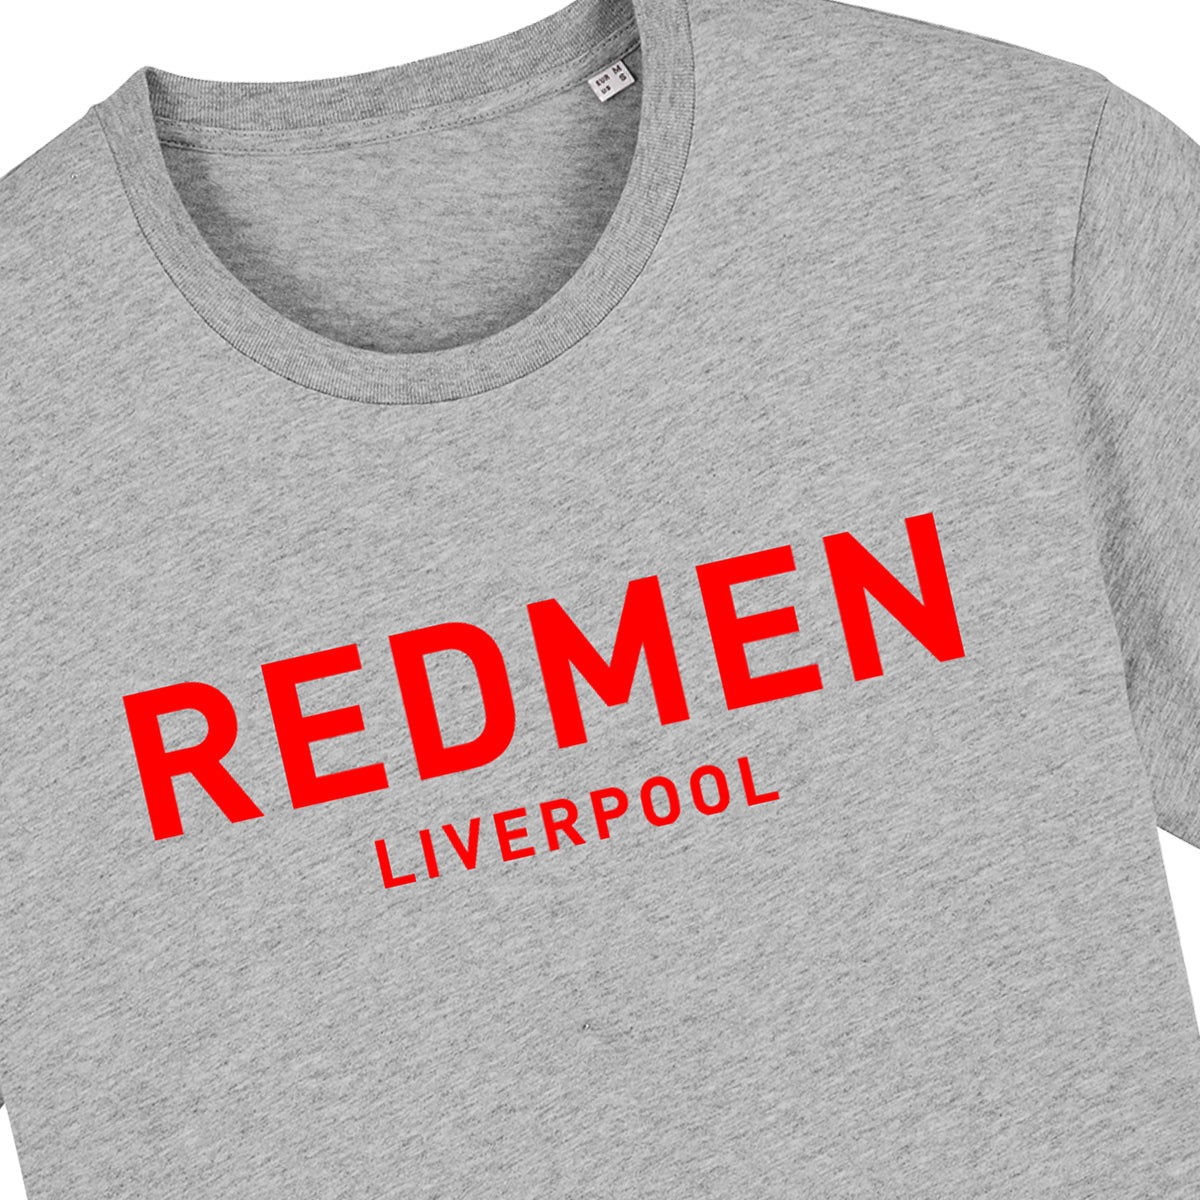 The House of Redmen Tee